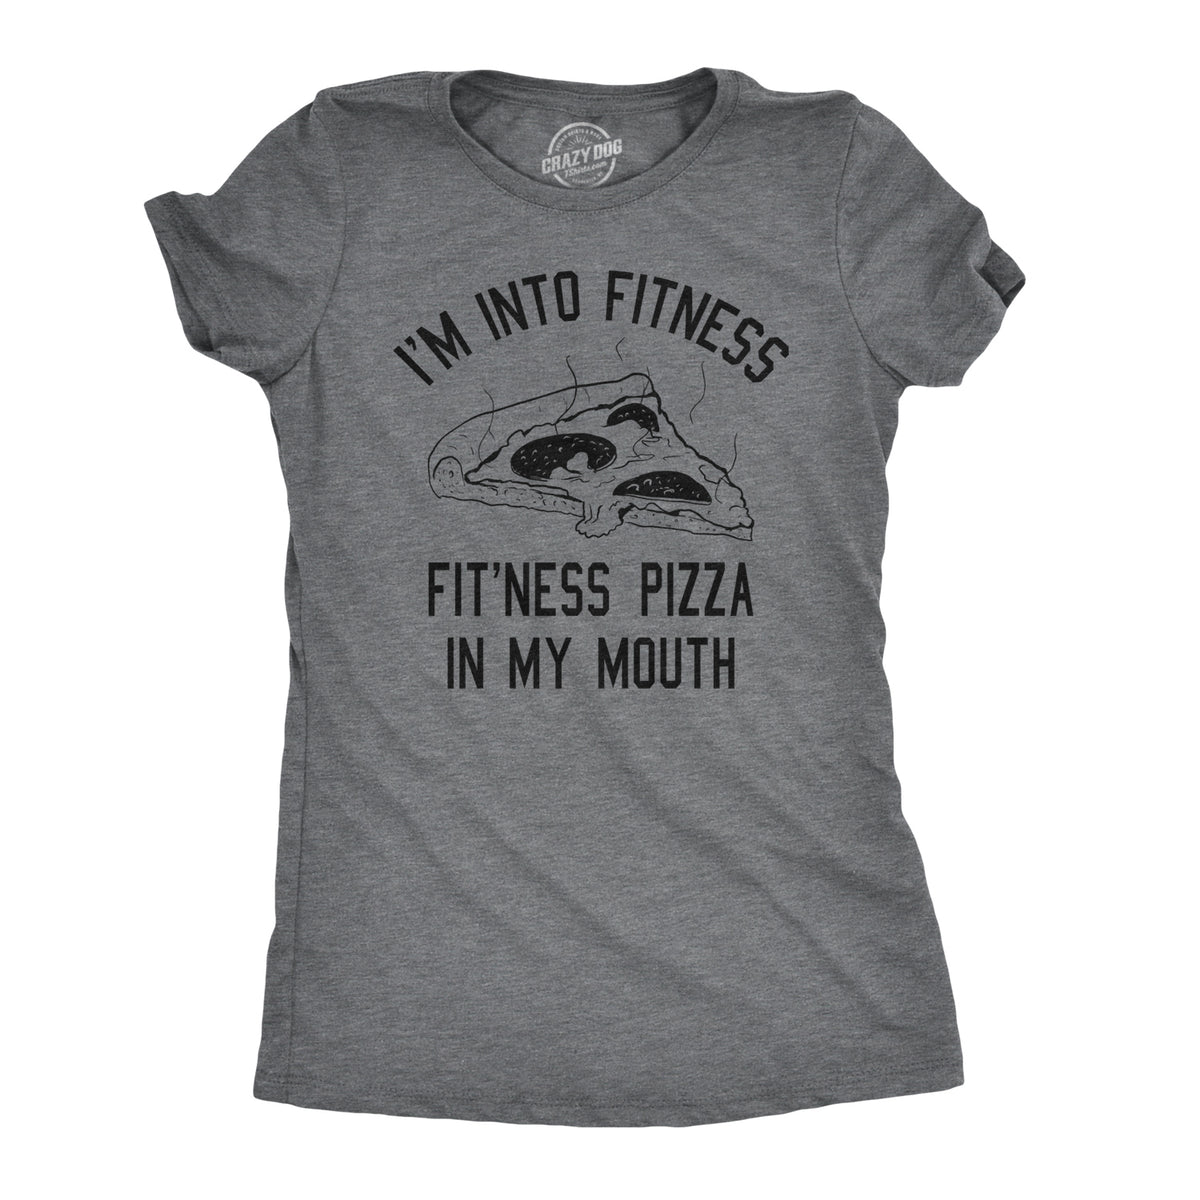 Funny Dark Heather Grey Fitness Pizza In My Mouth Womens T Shirt Nerdy Fitness Food Tee